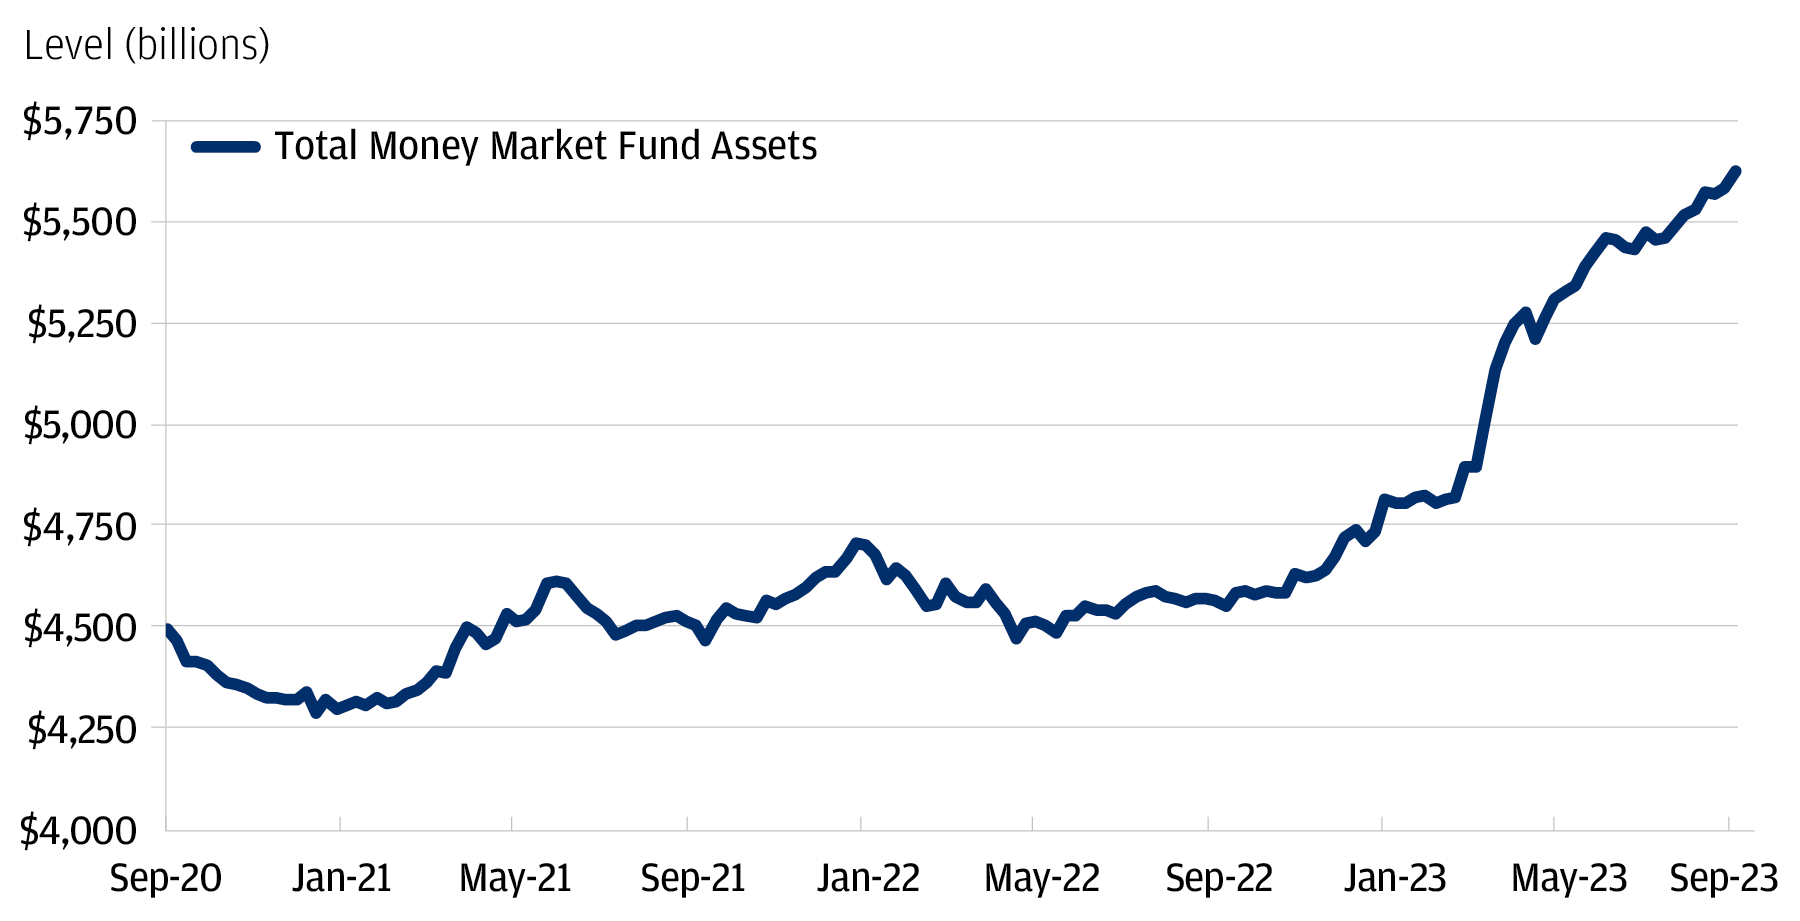 Line chart as of September 6, 2020 showing total money market fund assets increasing significantly beginning in 2023. The chart displays weekly money market fund assets in billions of dollars and showcases a ~$800bn increase in total money market fund assets in 2023.